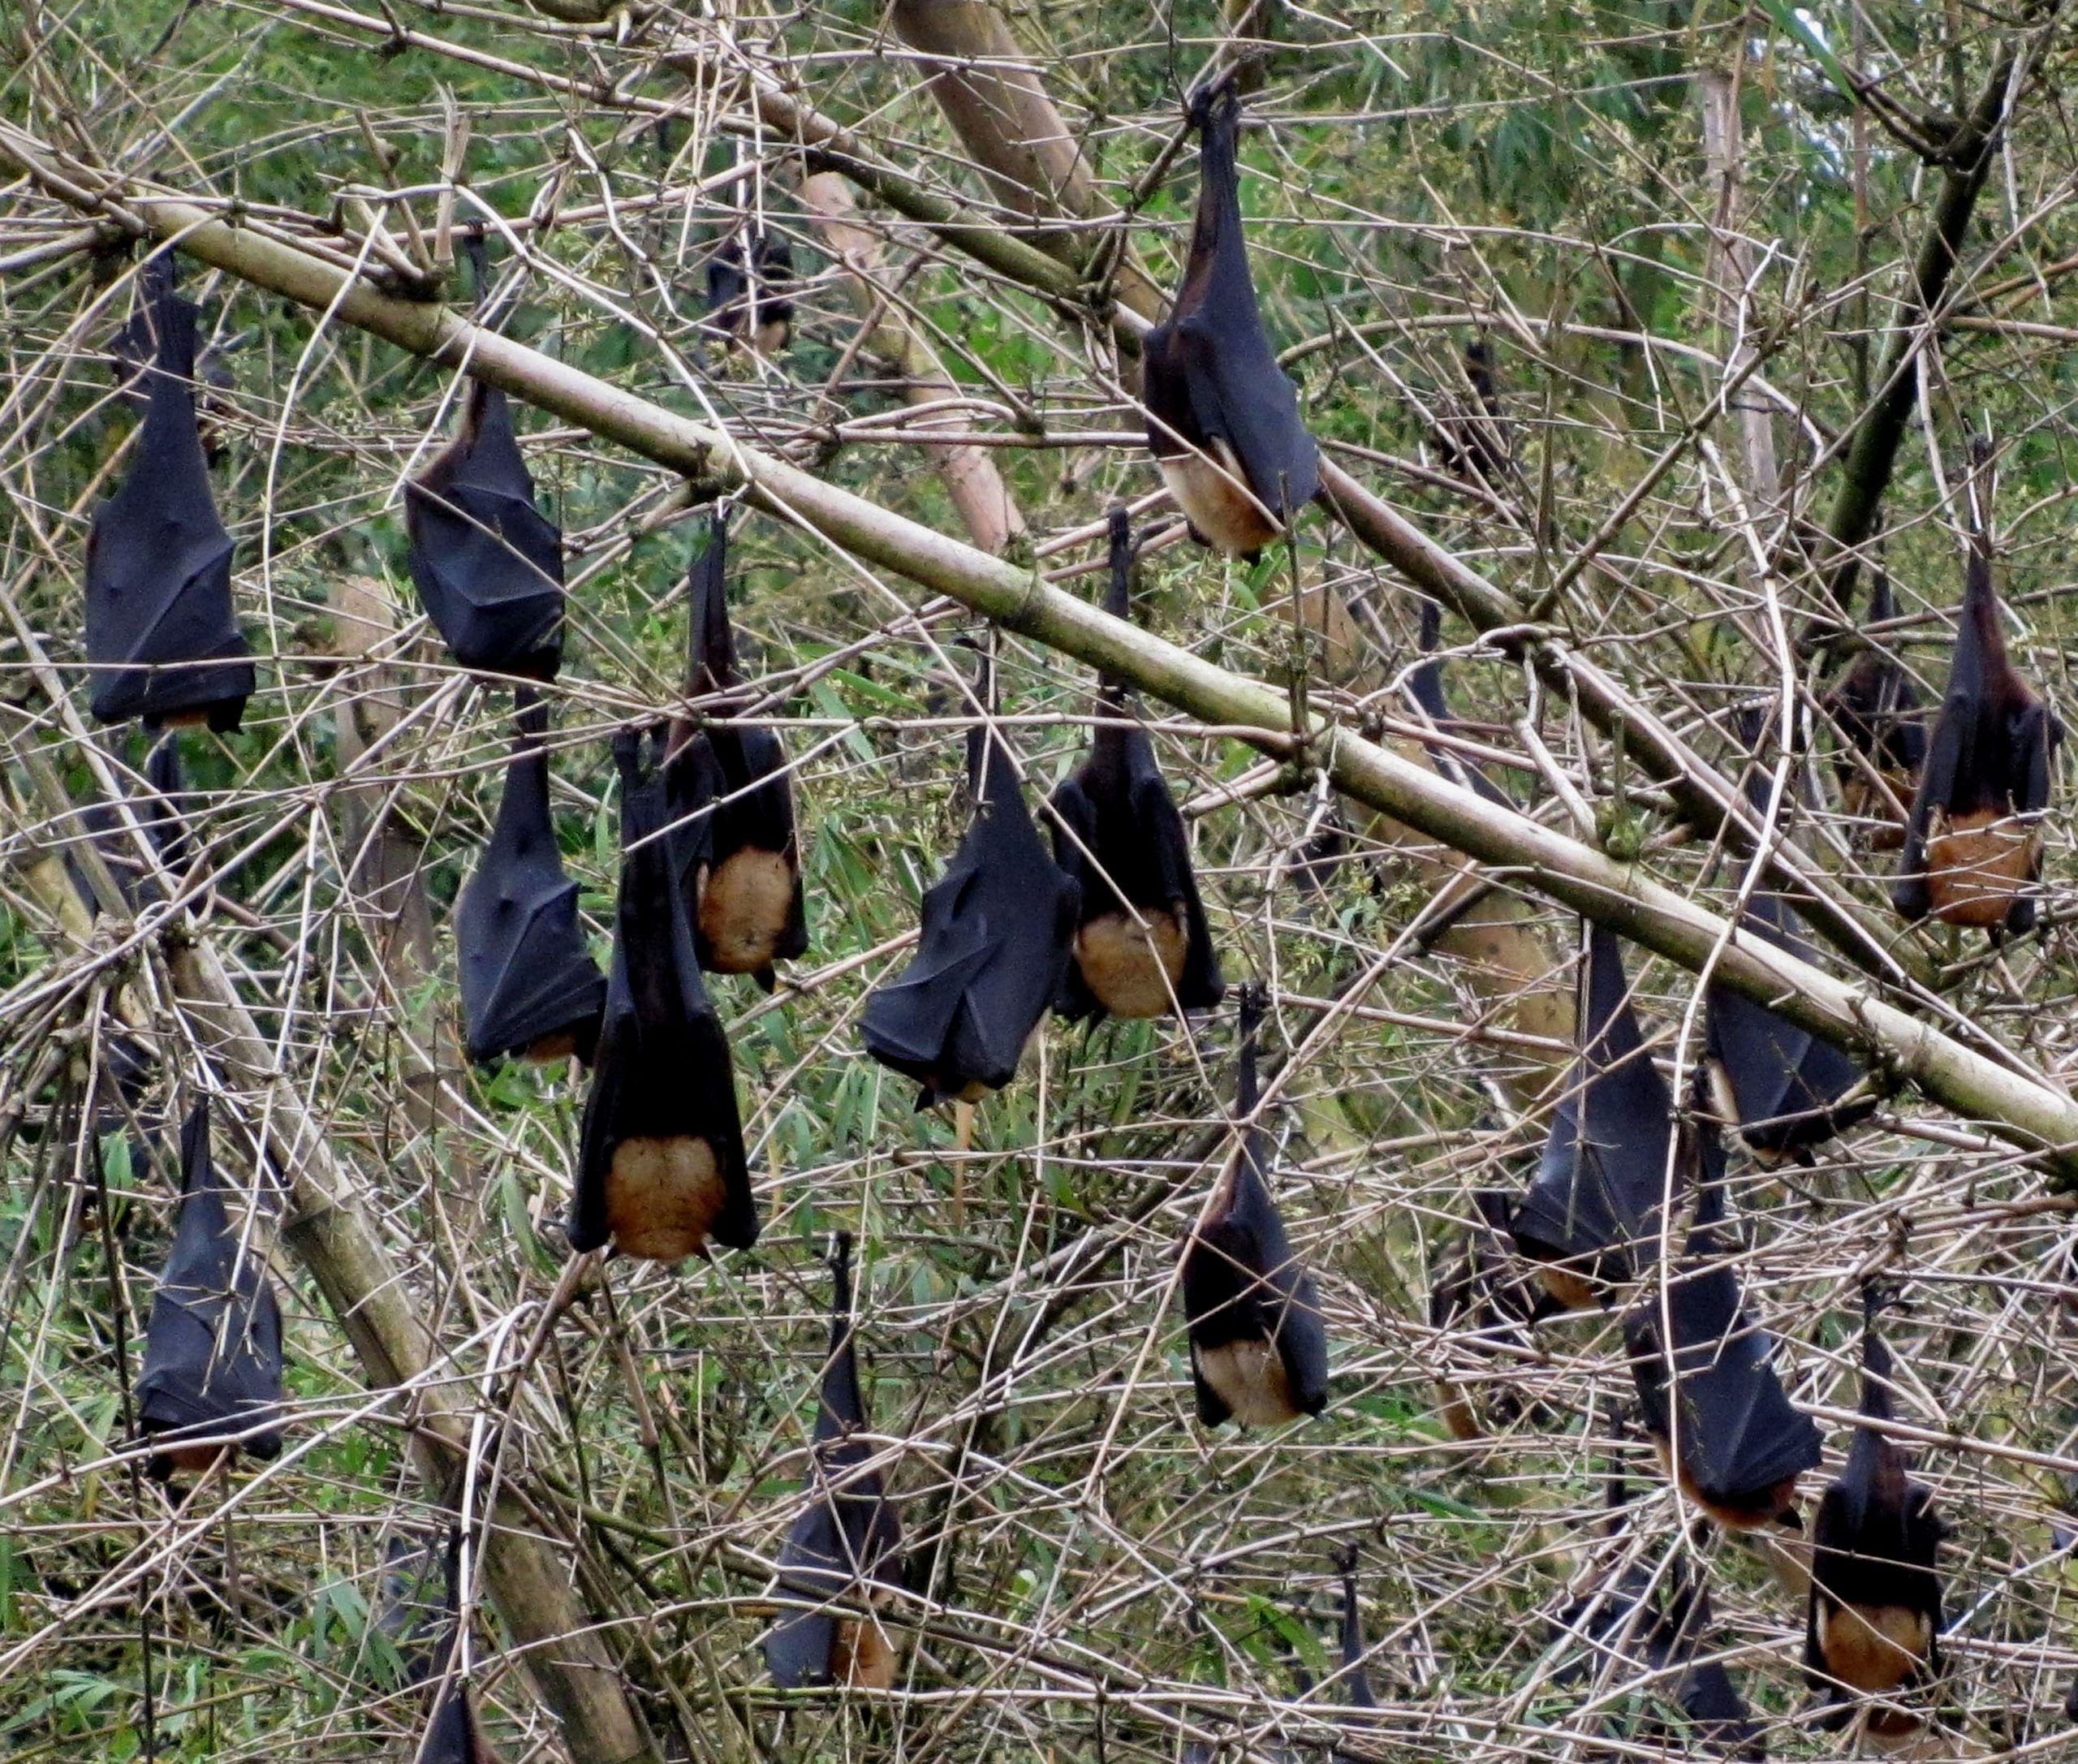 Live with bats or kill them? There is a third option even during  coronavirus crisis